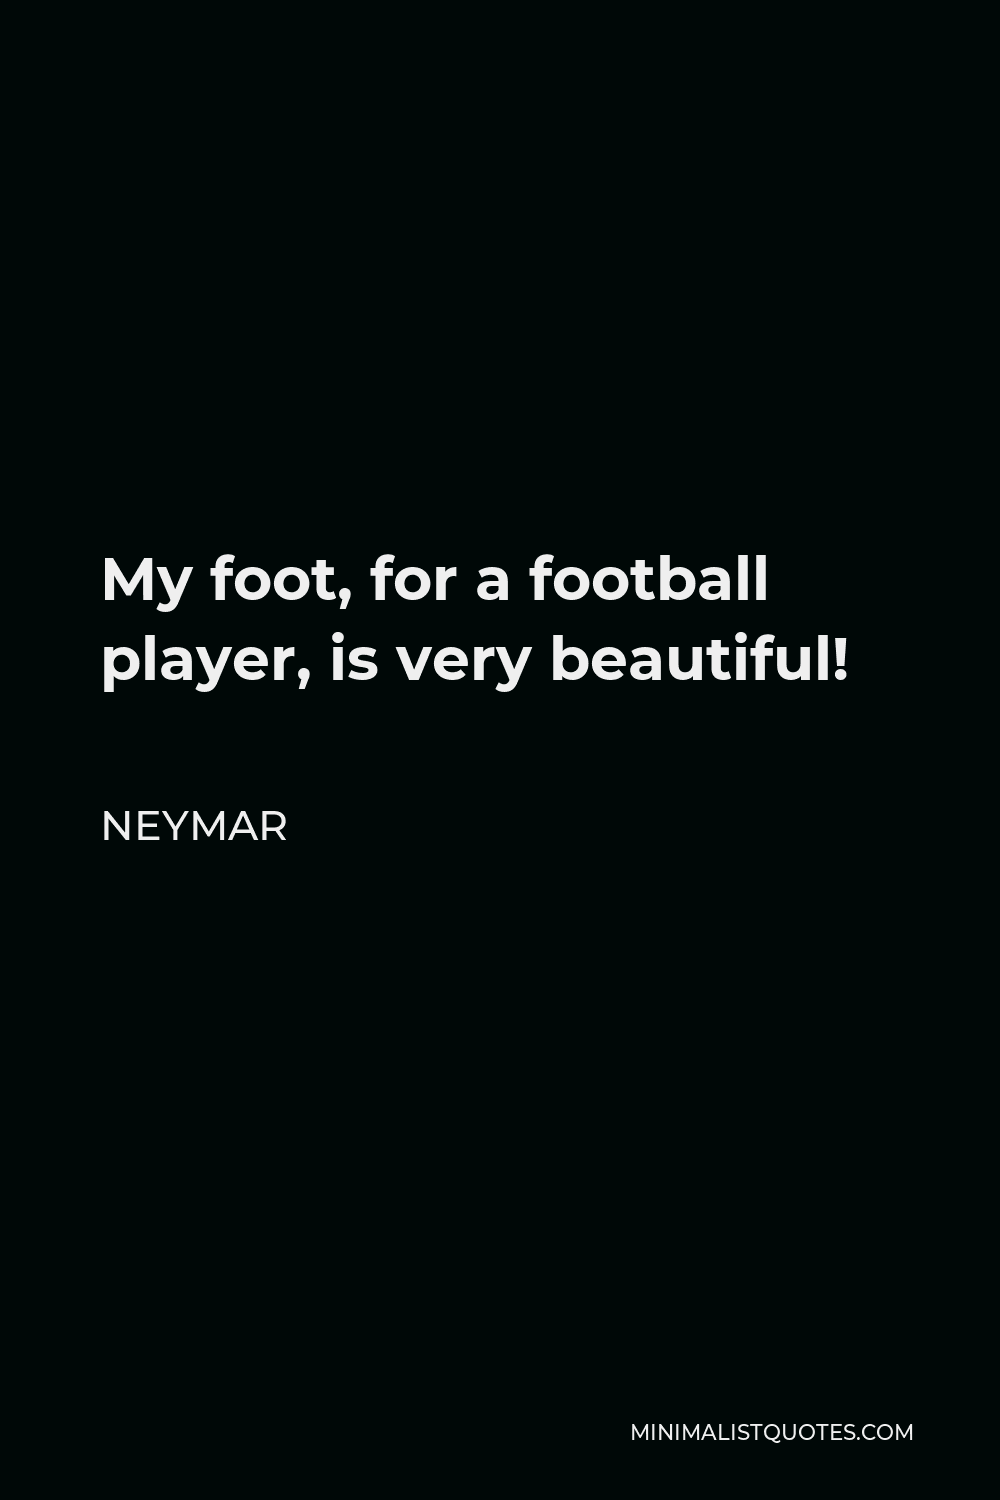 Neymar Quote - My foot, for a football player, is very beautiful!